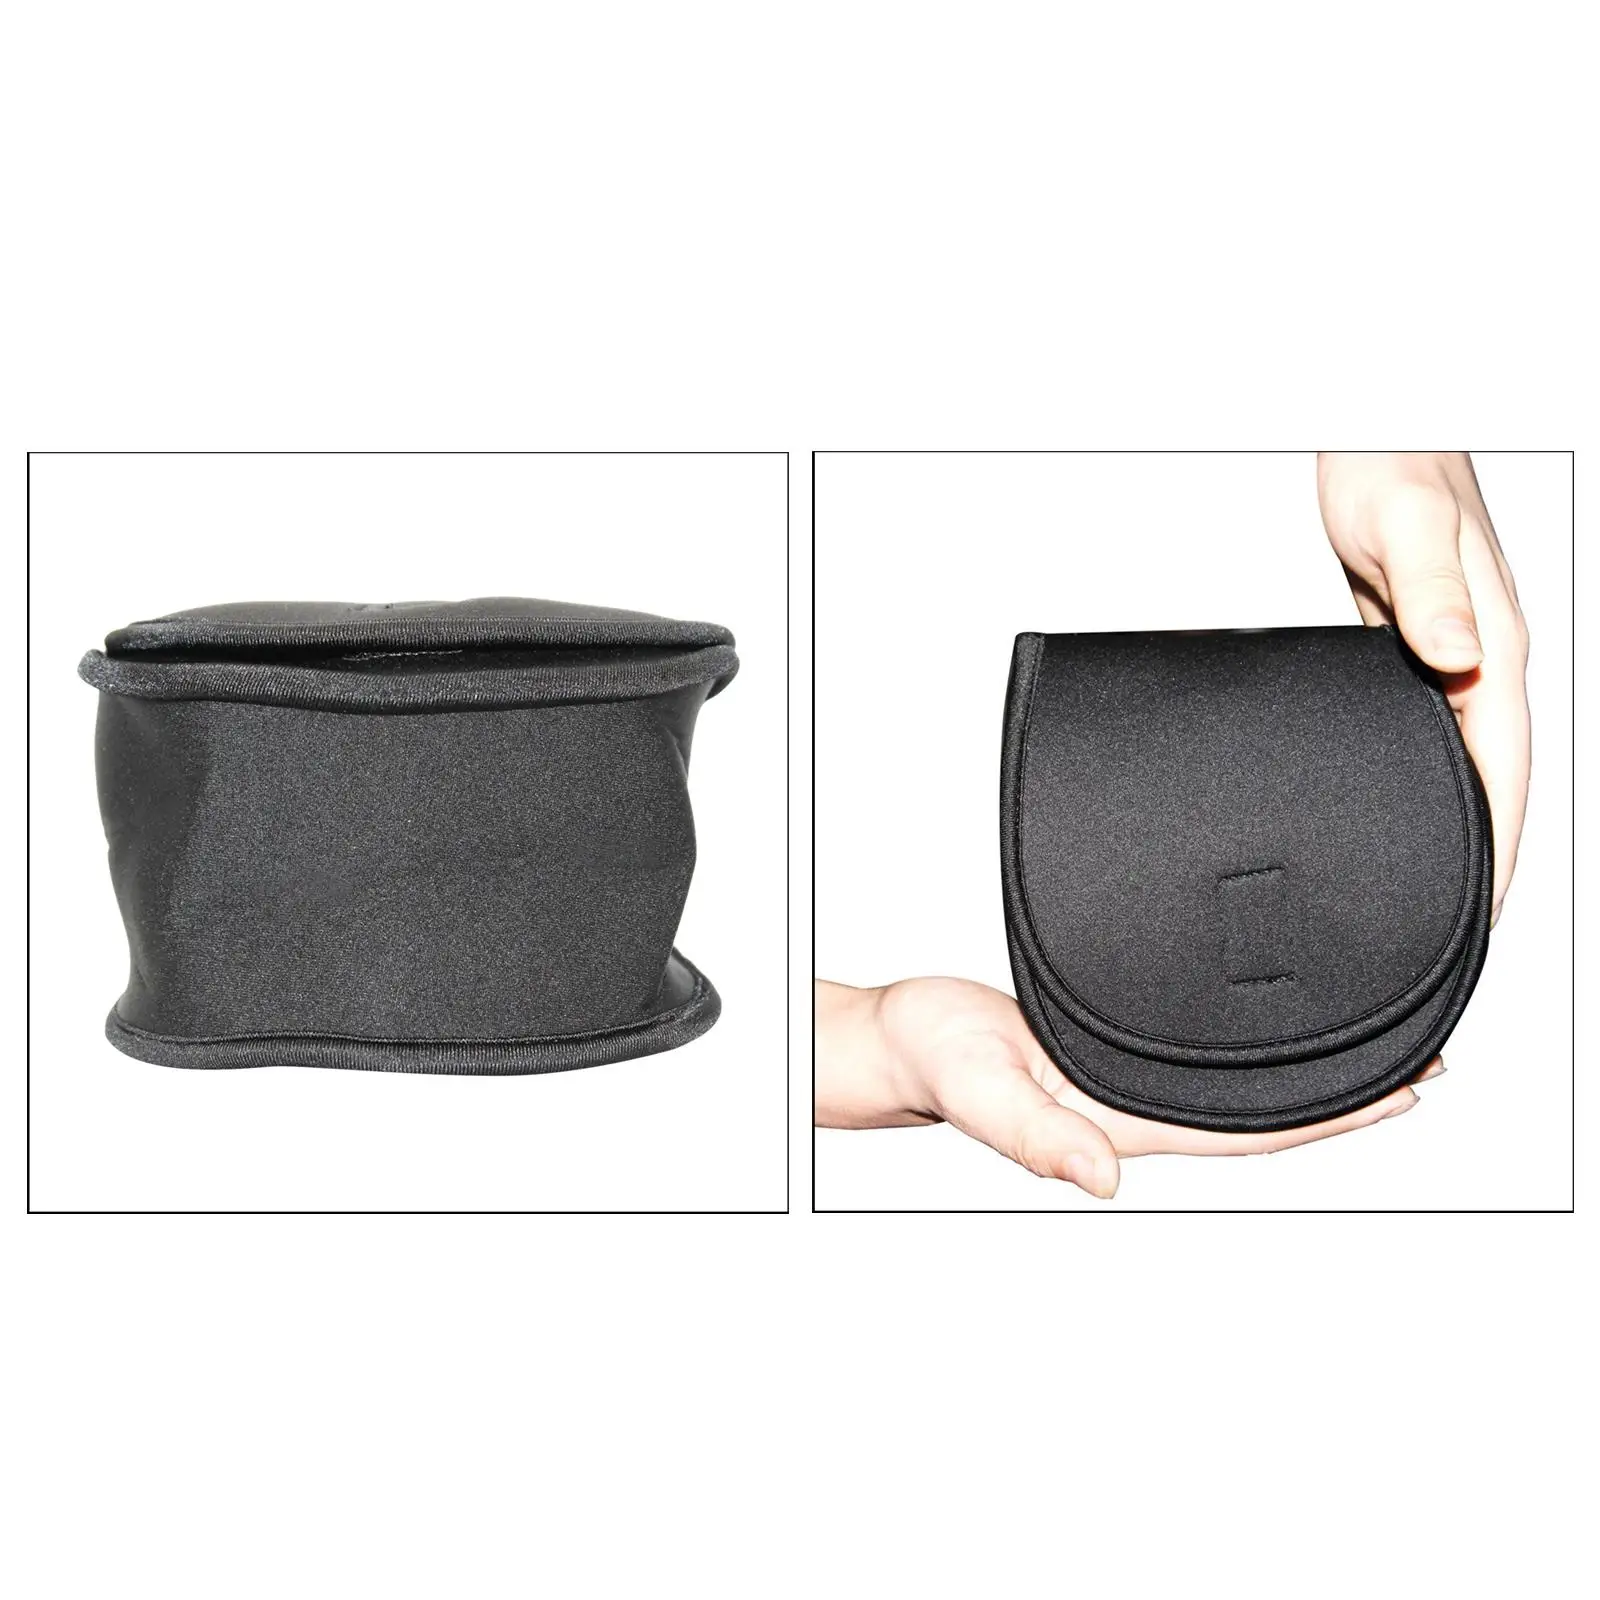   Reel Cover Pouch Bag Protective Holder Protectors